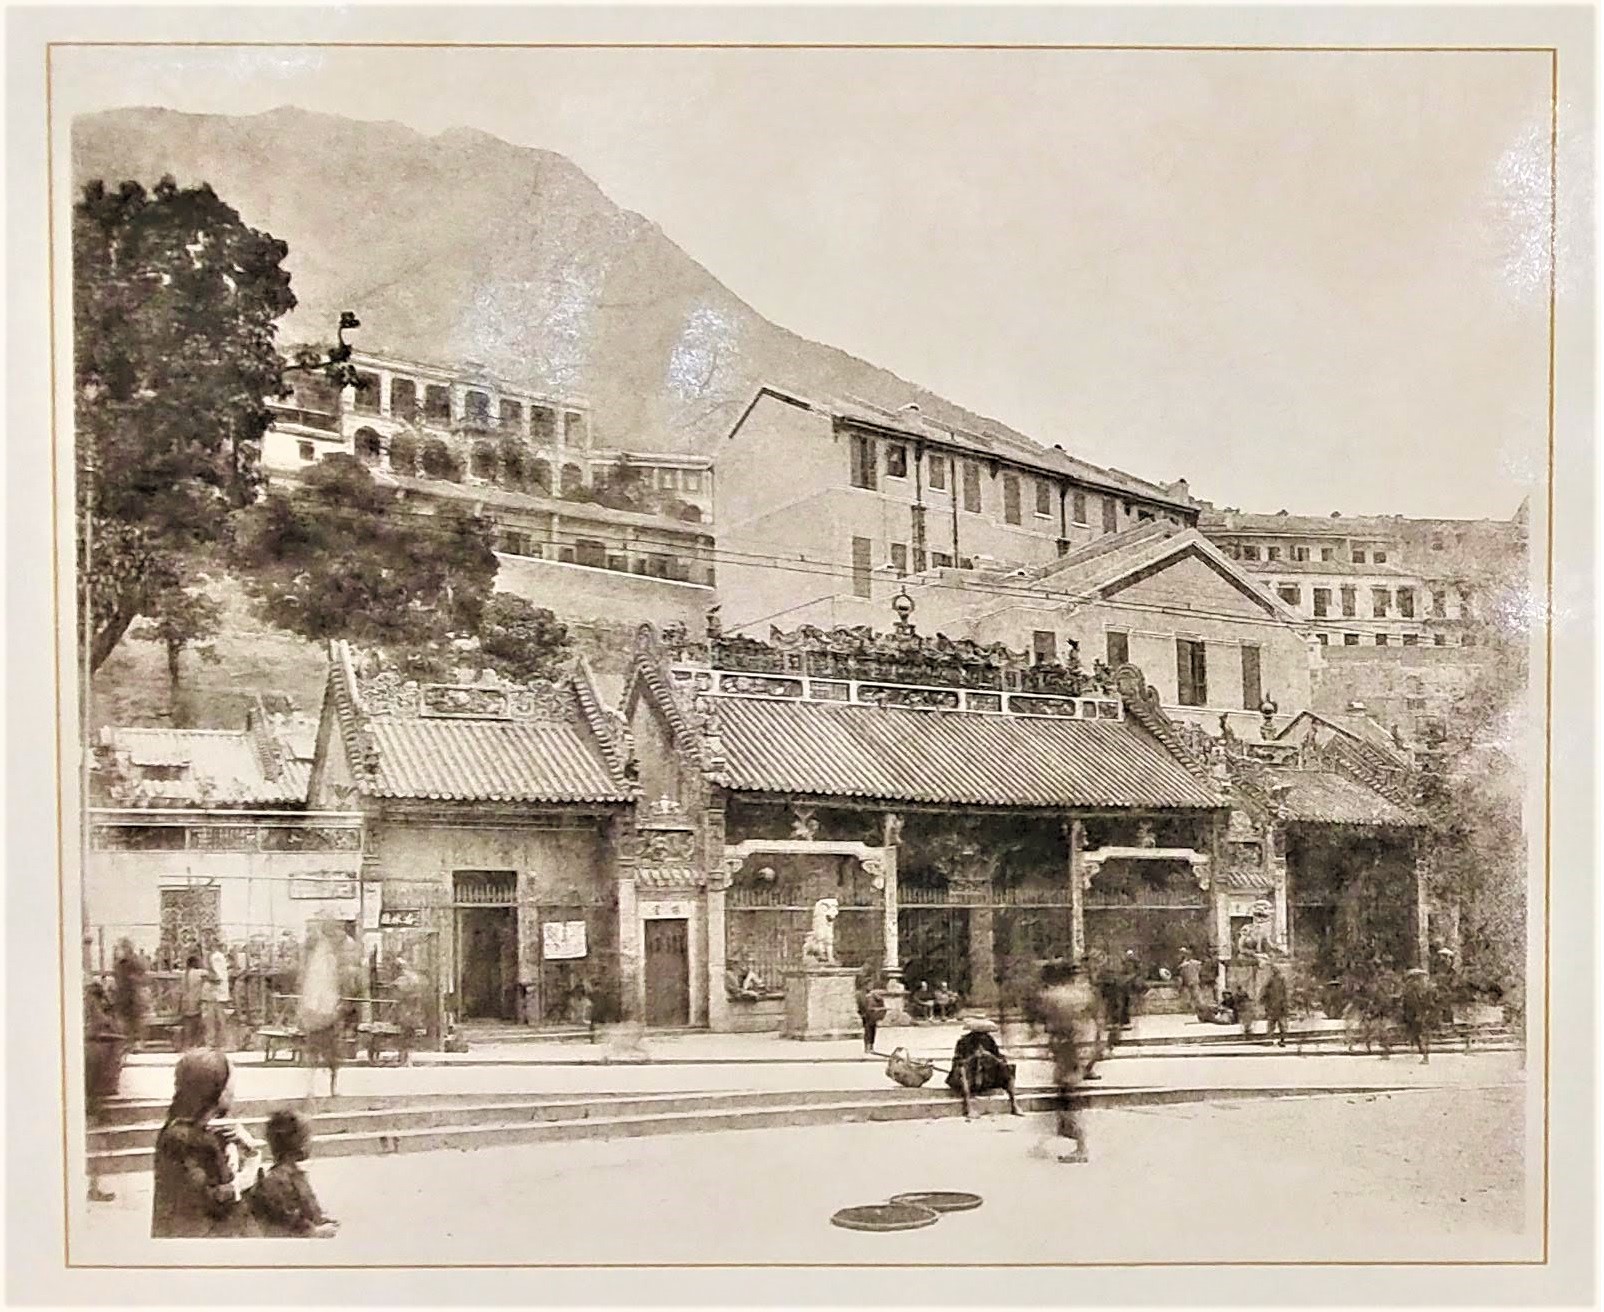 Man Mo Temple in the past